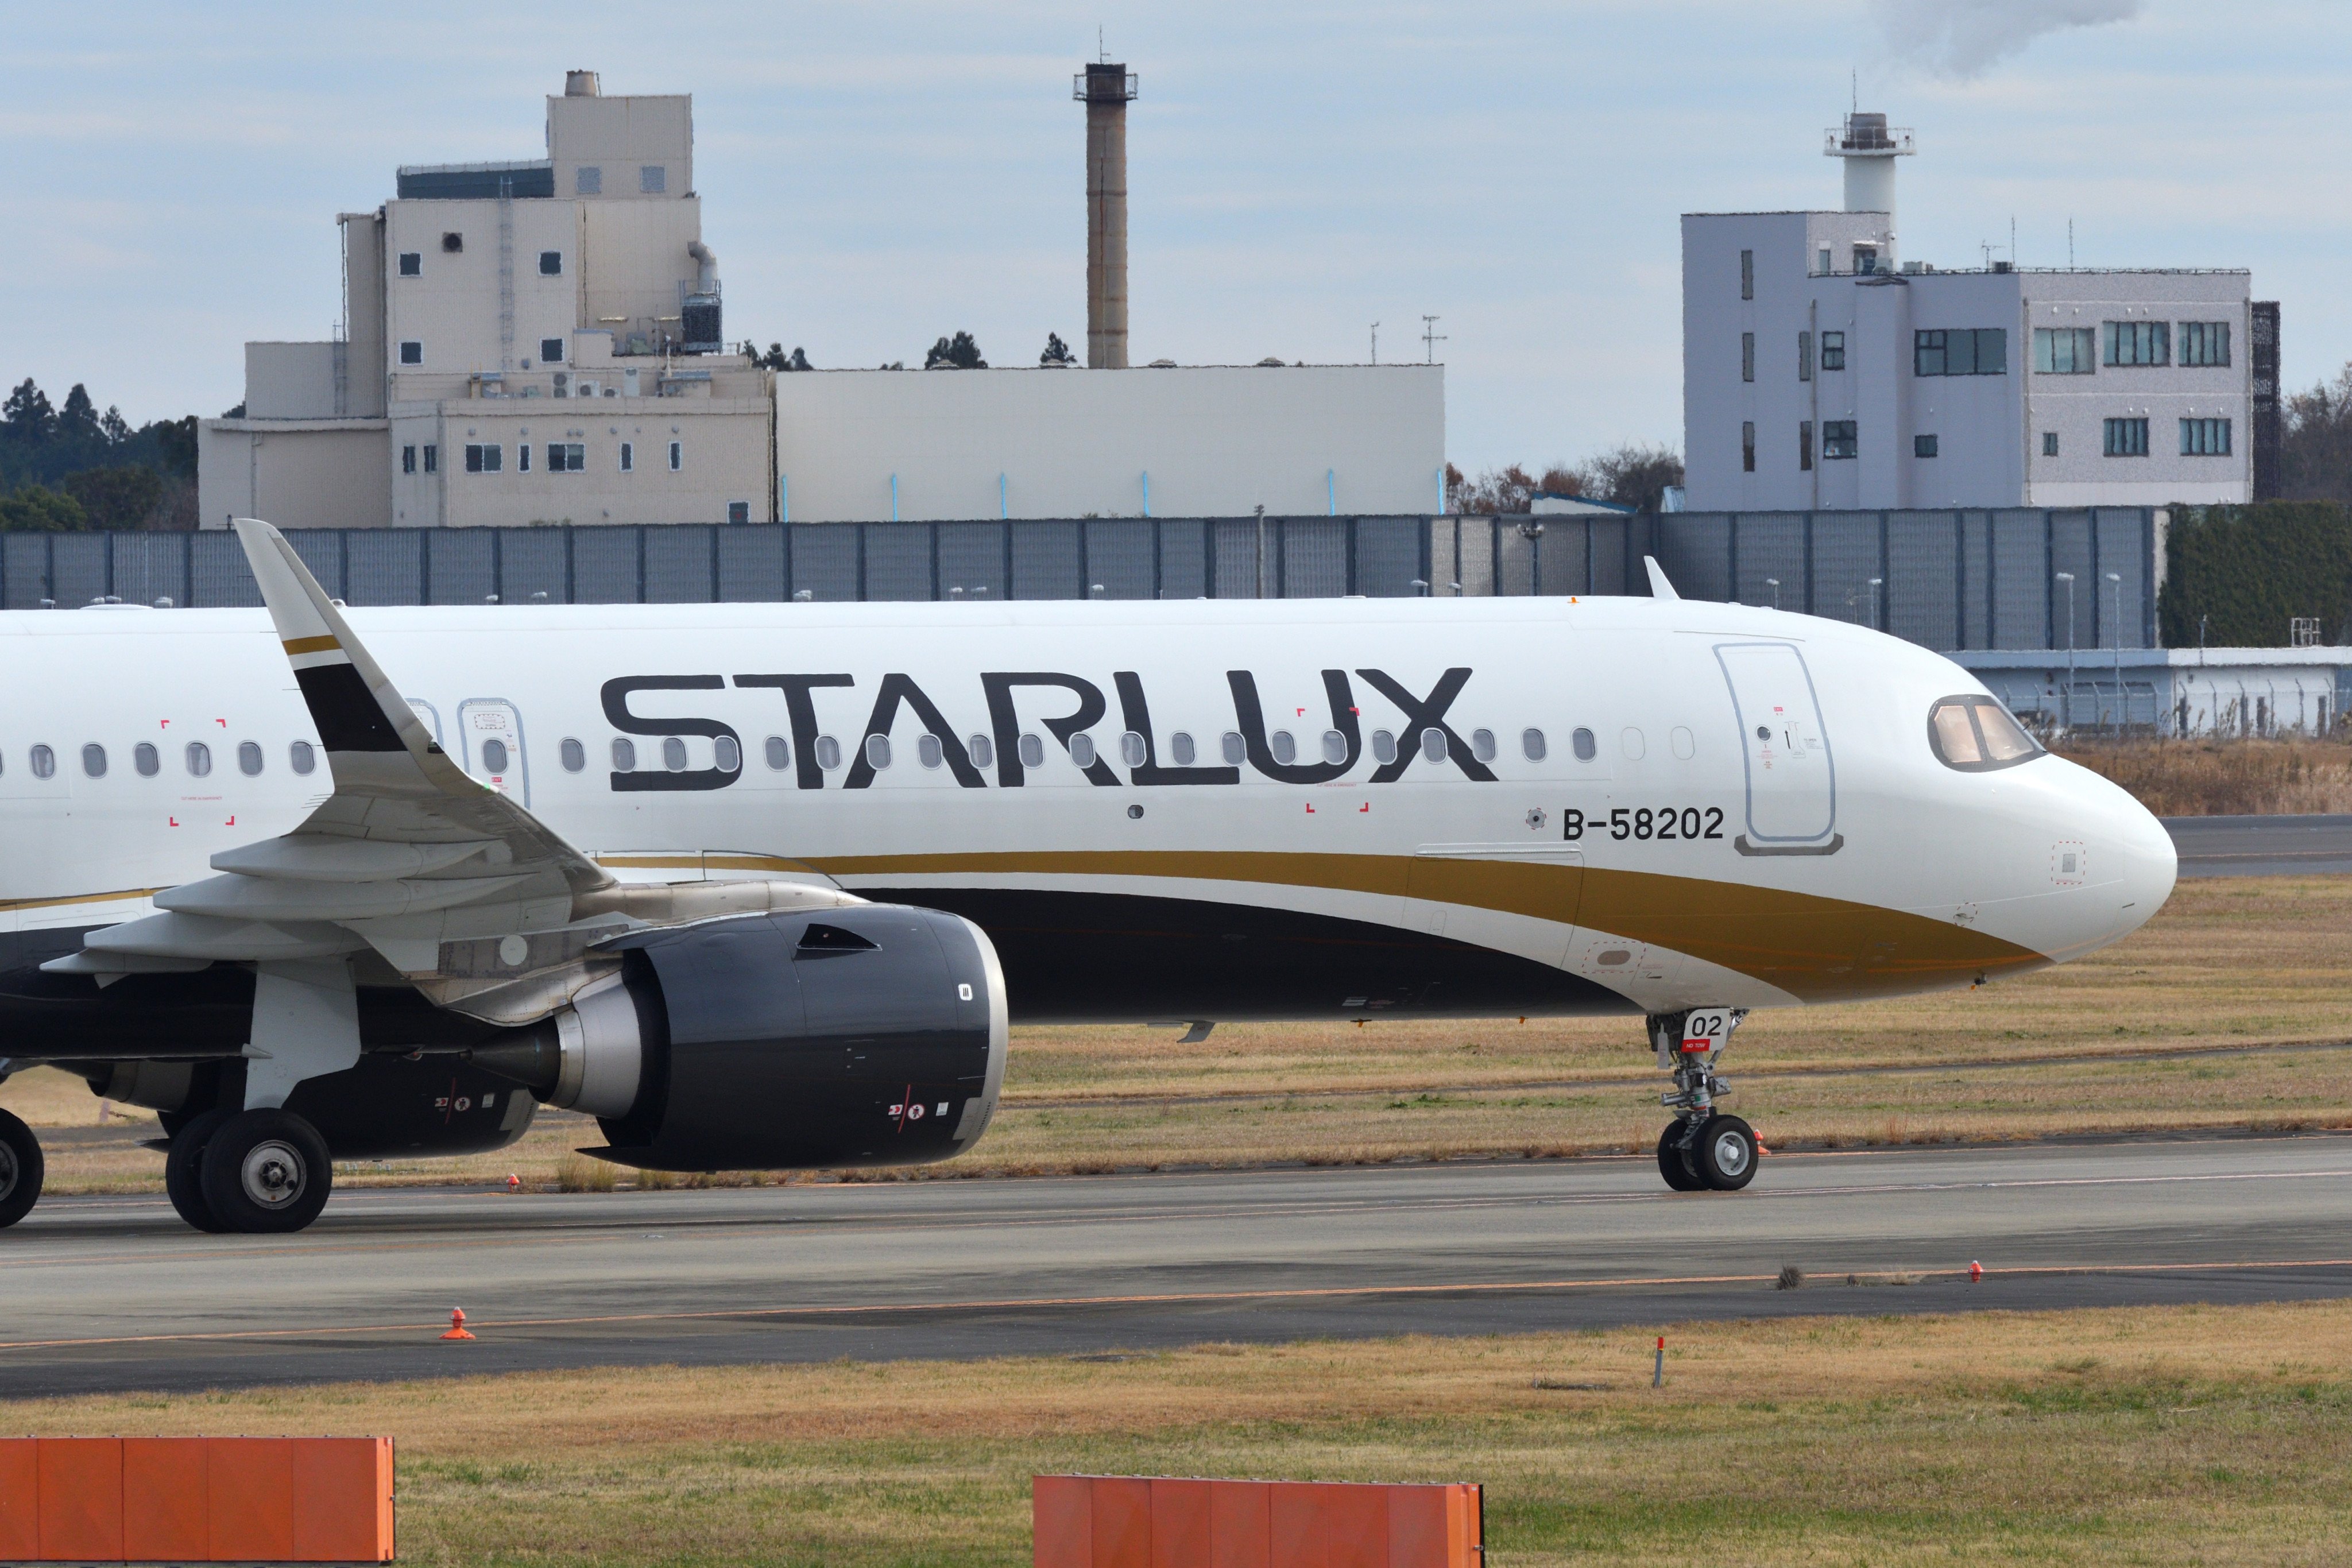 Founded in 2018, Starlux is now the third-largest airline in Taiwan. Photo: Shutterstock